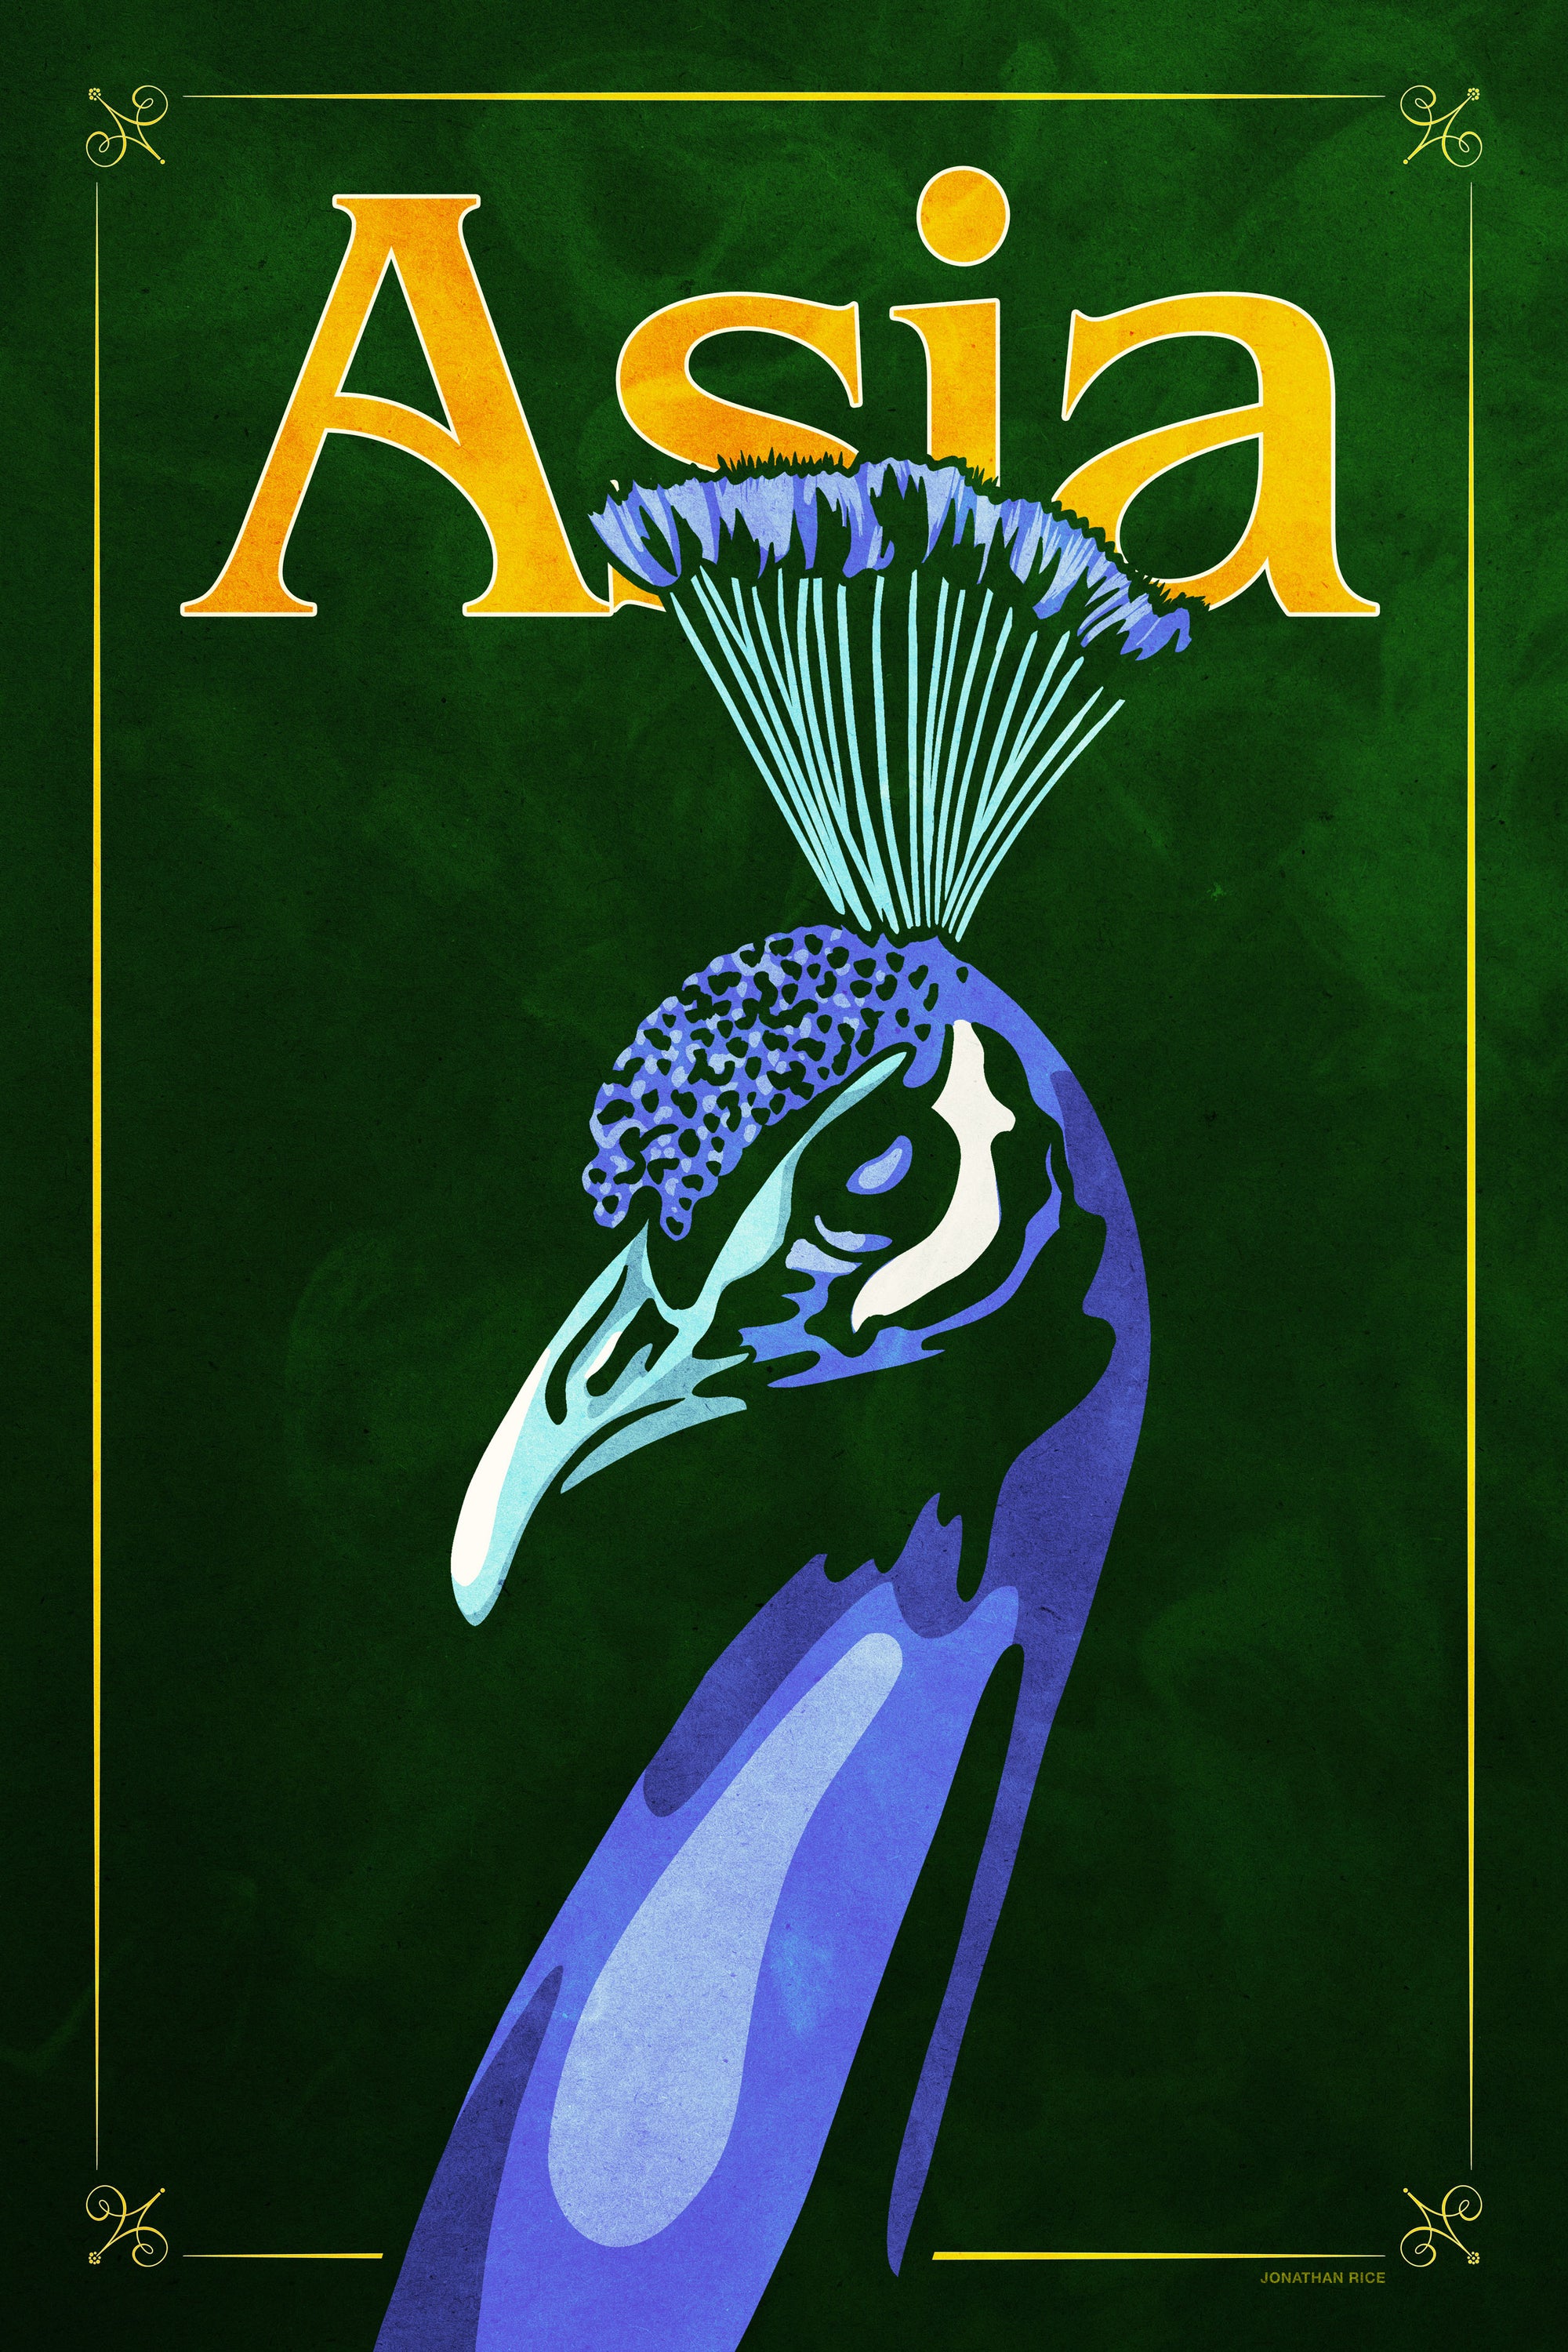 Bold graphic giclée art print of an Asian Peacock. Print shows an Asian Peacock blending into a dark green background and overlapping the word “Asia”.